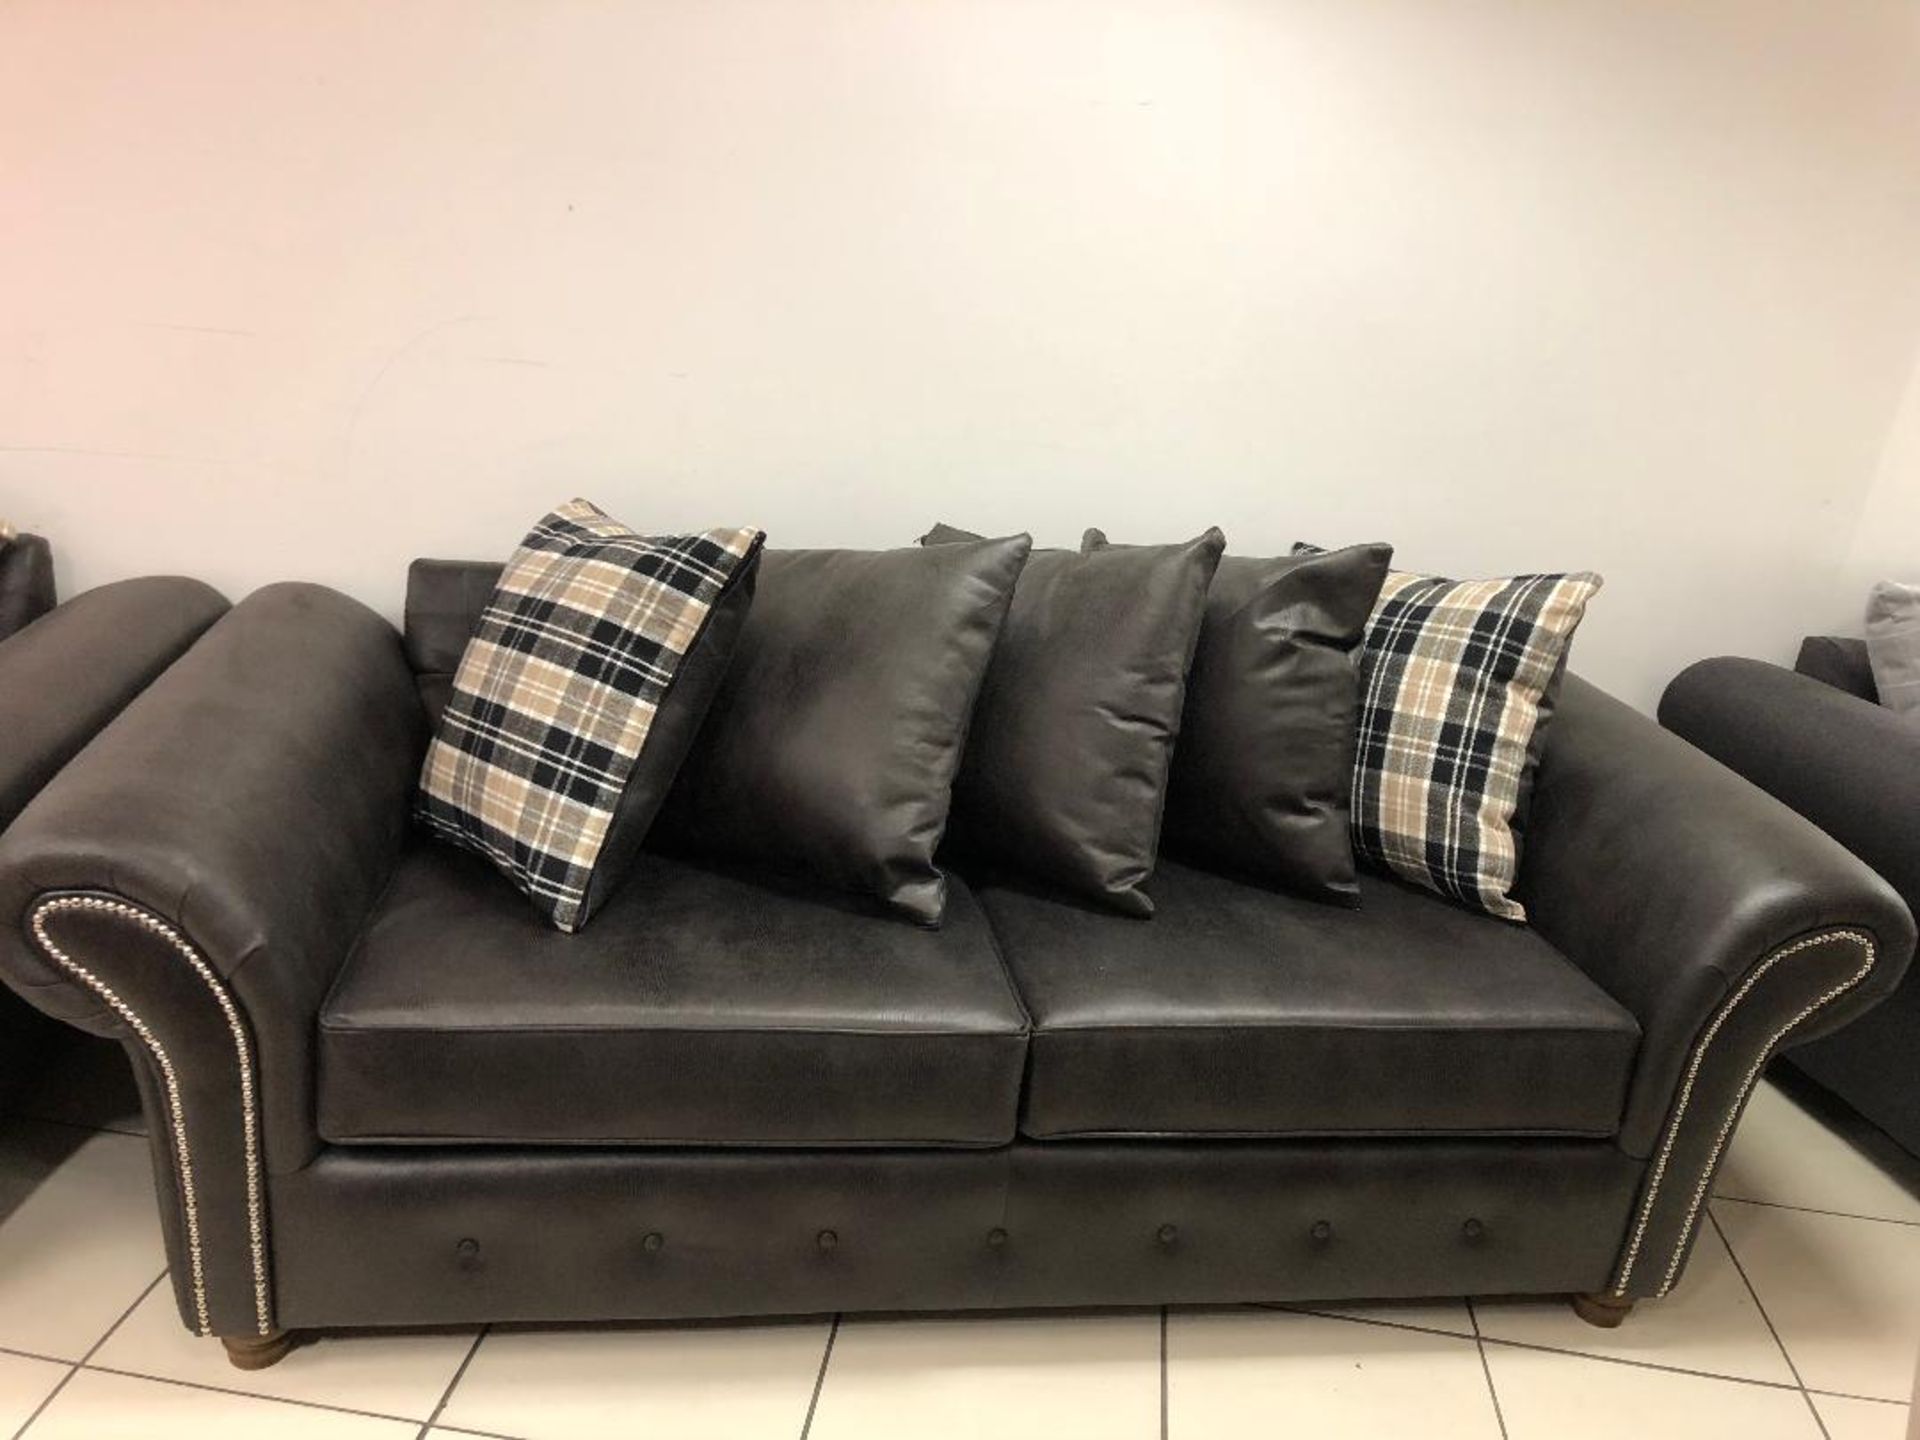 Verona 3 seater plus 2 seater sofas in black bonded leather with check accent cushions